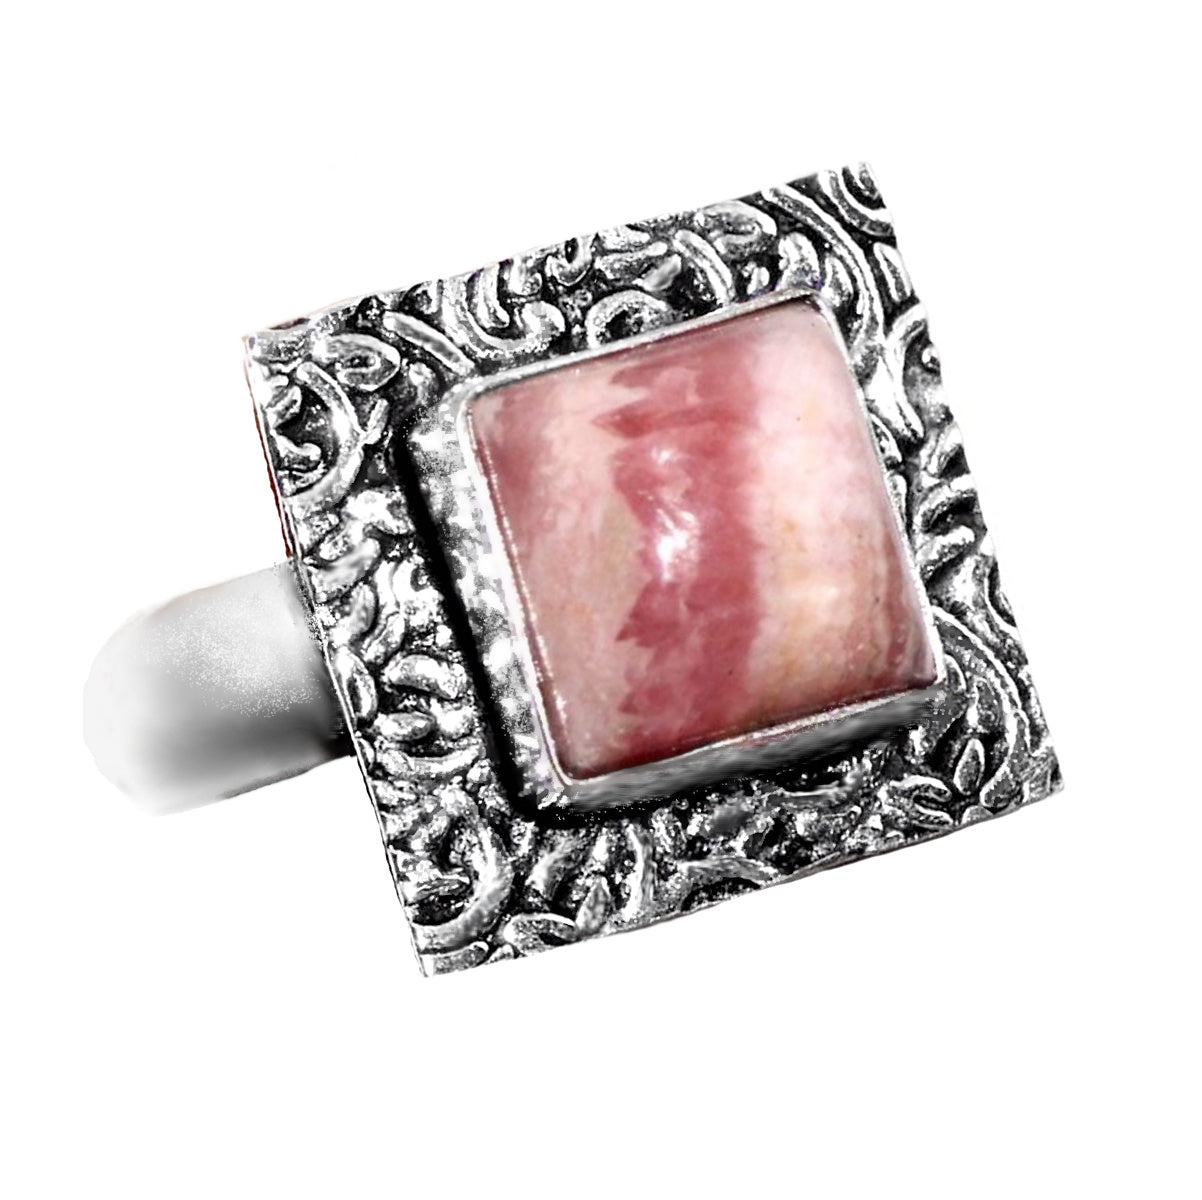 Natural Rhodochrosite Square Gemstone .925 Sterling Silver Ring Size 8 or Q